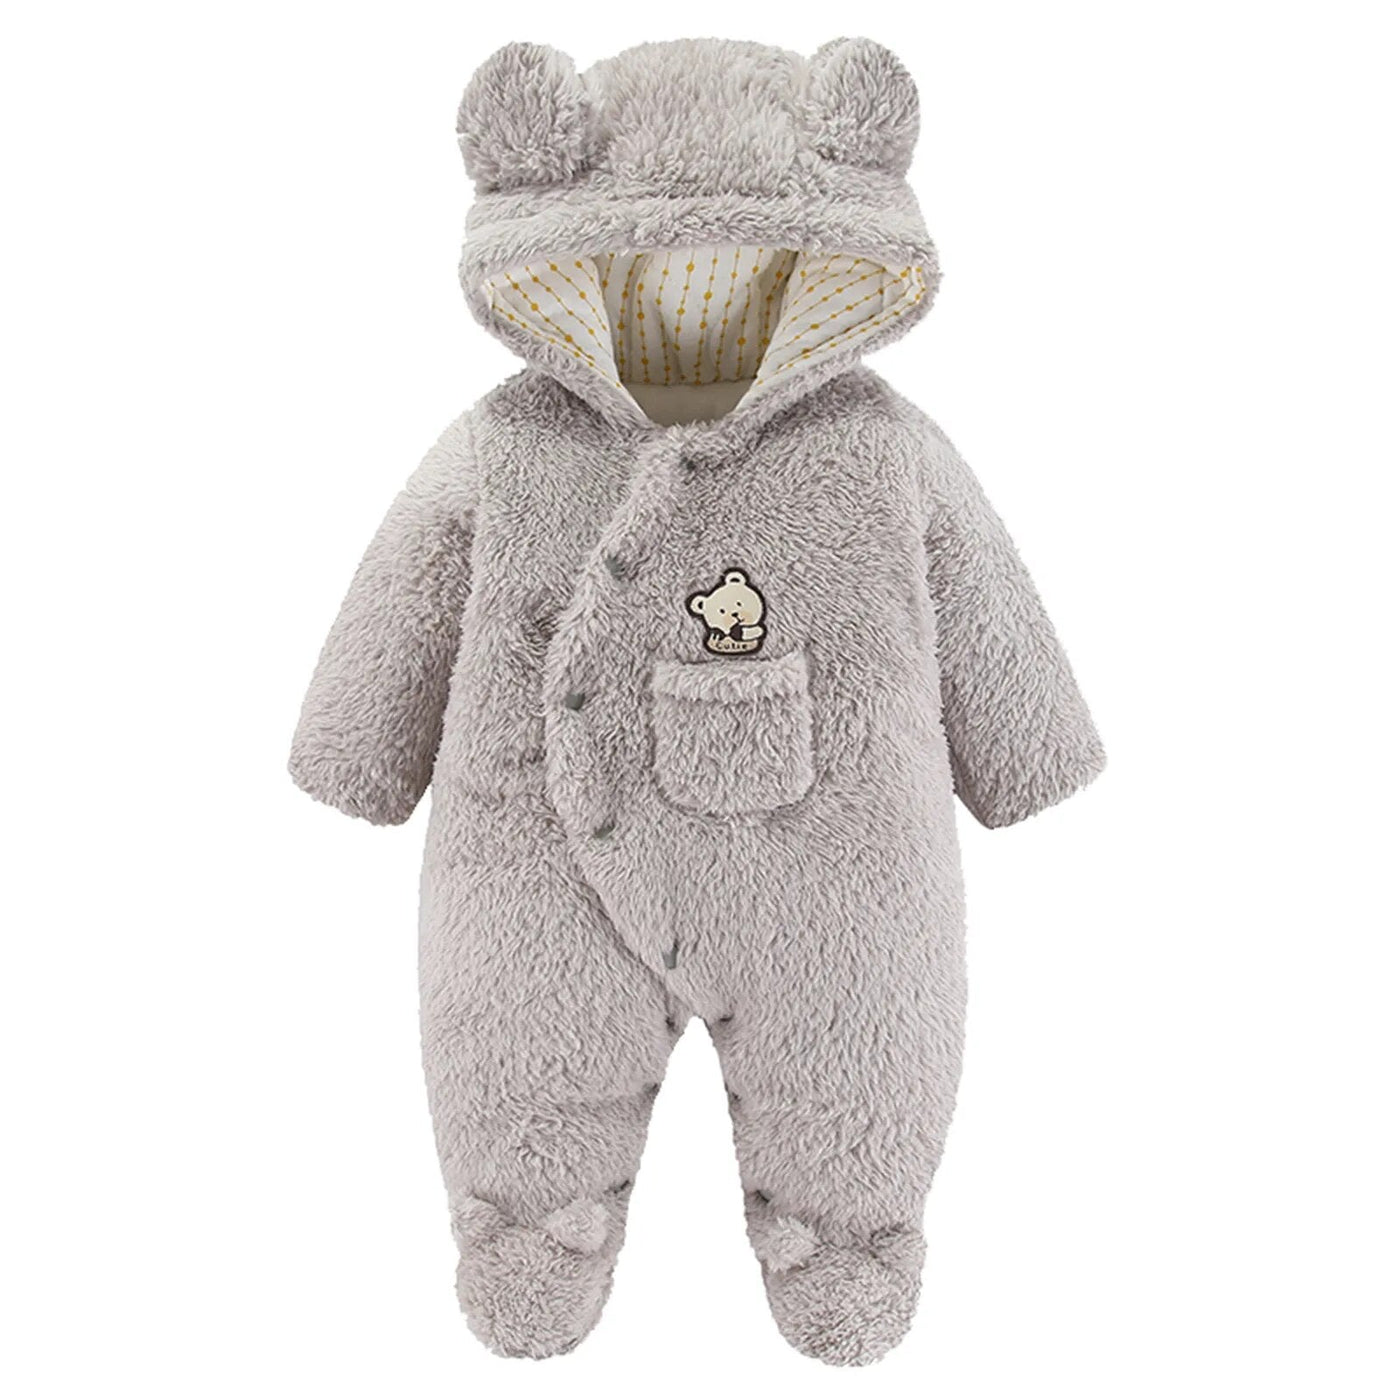 Plush Hooded Teddy Bear Overall Button Down Jumpsuit Baby 0-12 Months - Skaldo & Malin